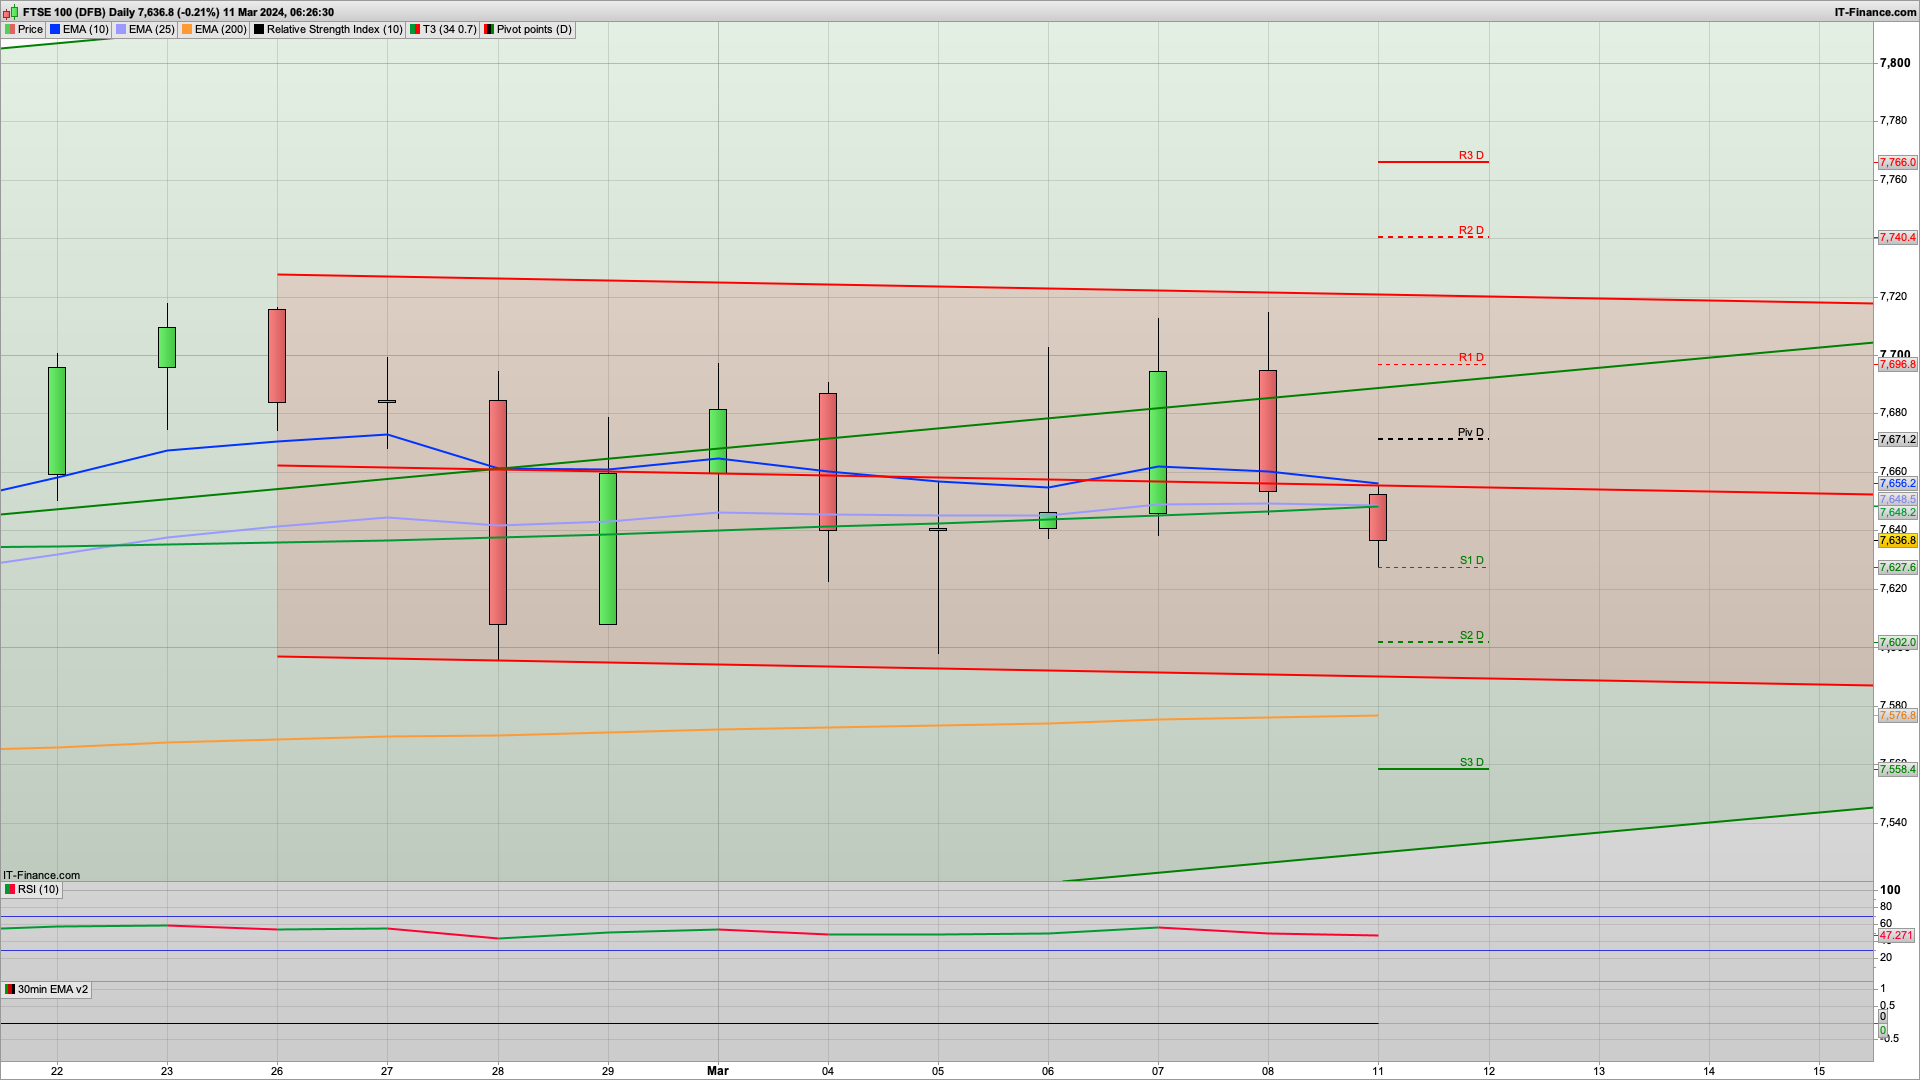 Looking bearish with 7671 7716 resistance | 7620 7602 7590 support